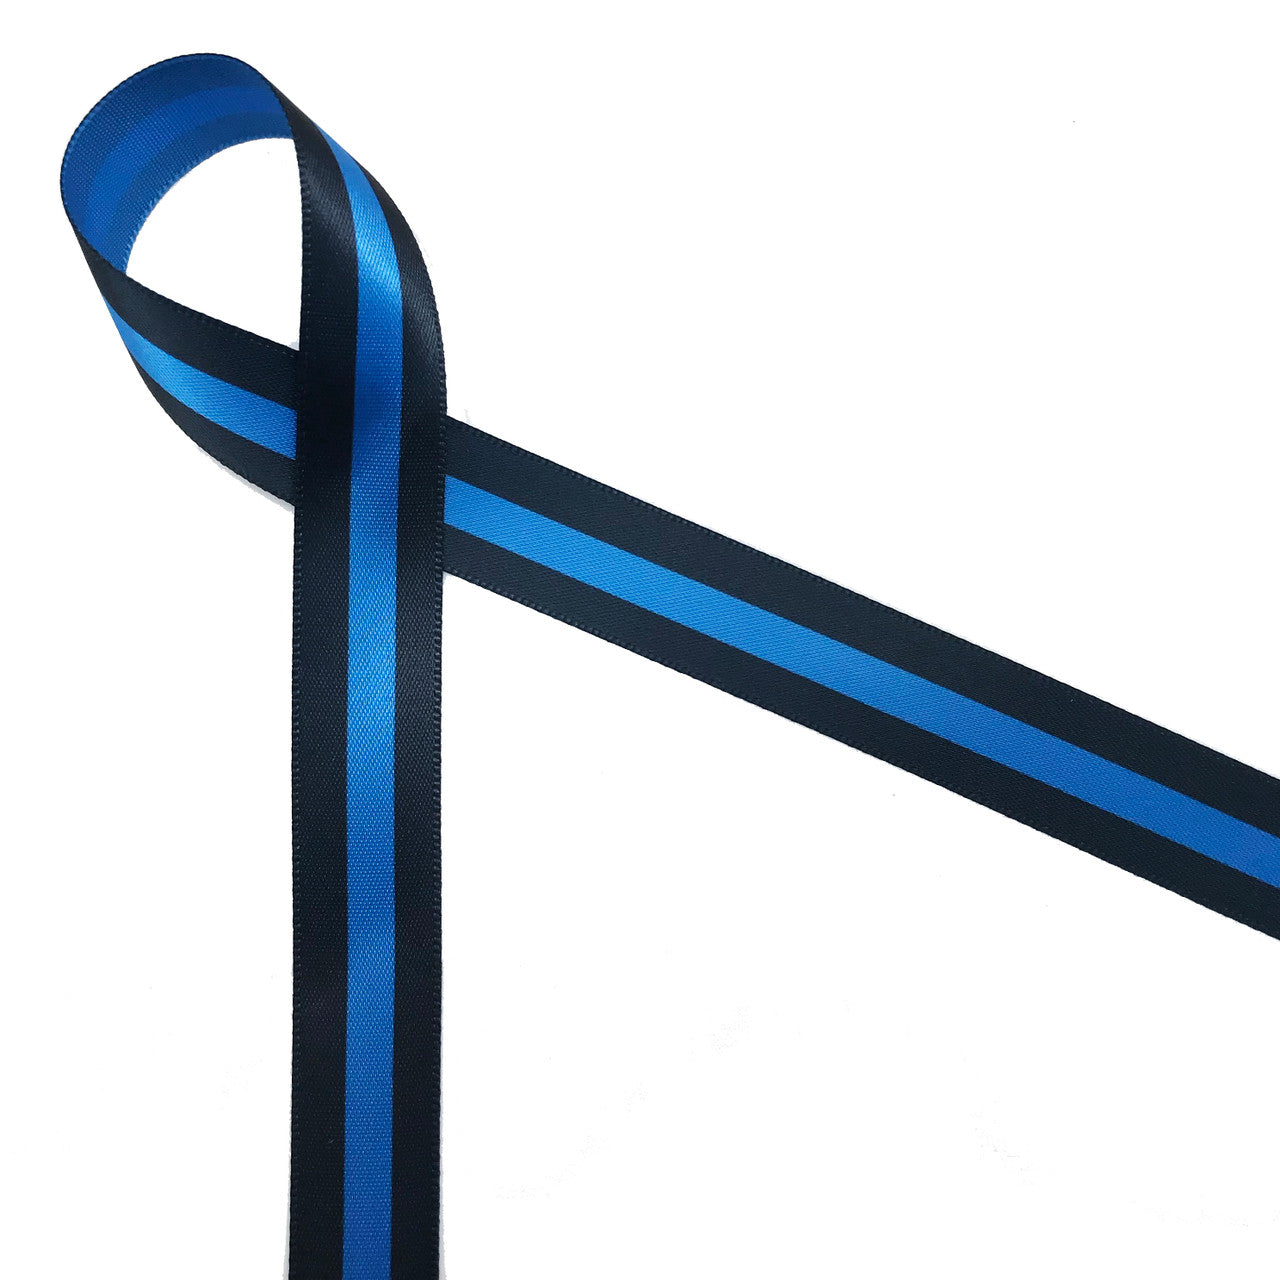 Blue Ribbons: Why They are so Iconic - Ribbon Impressions